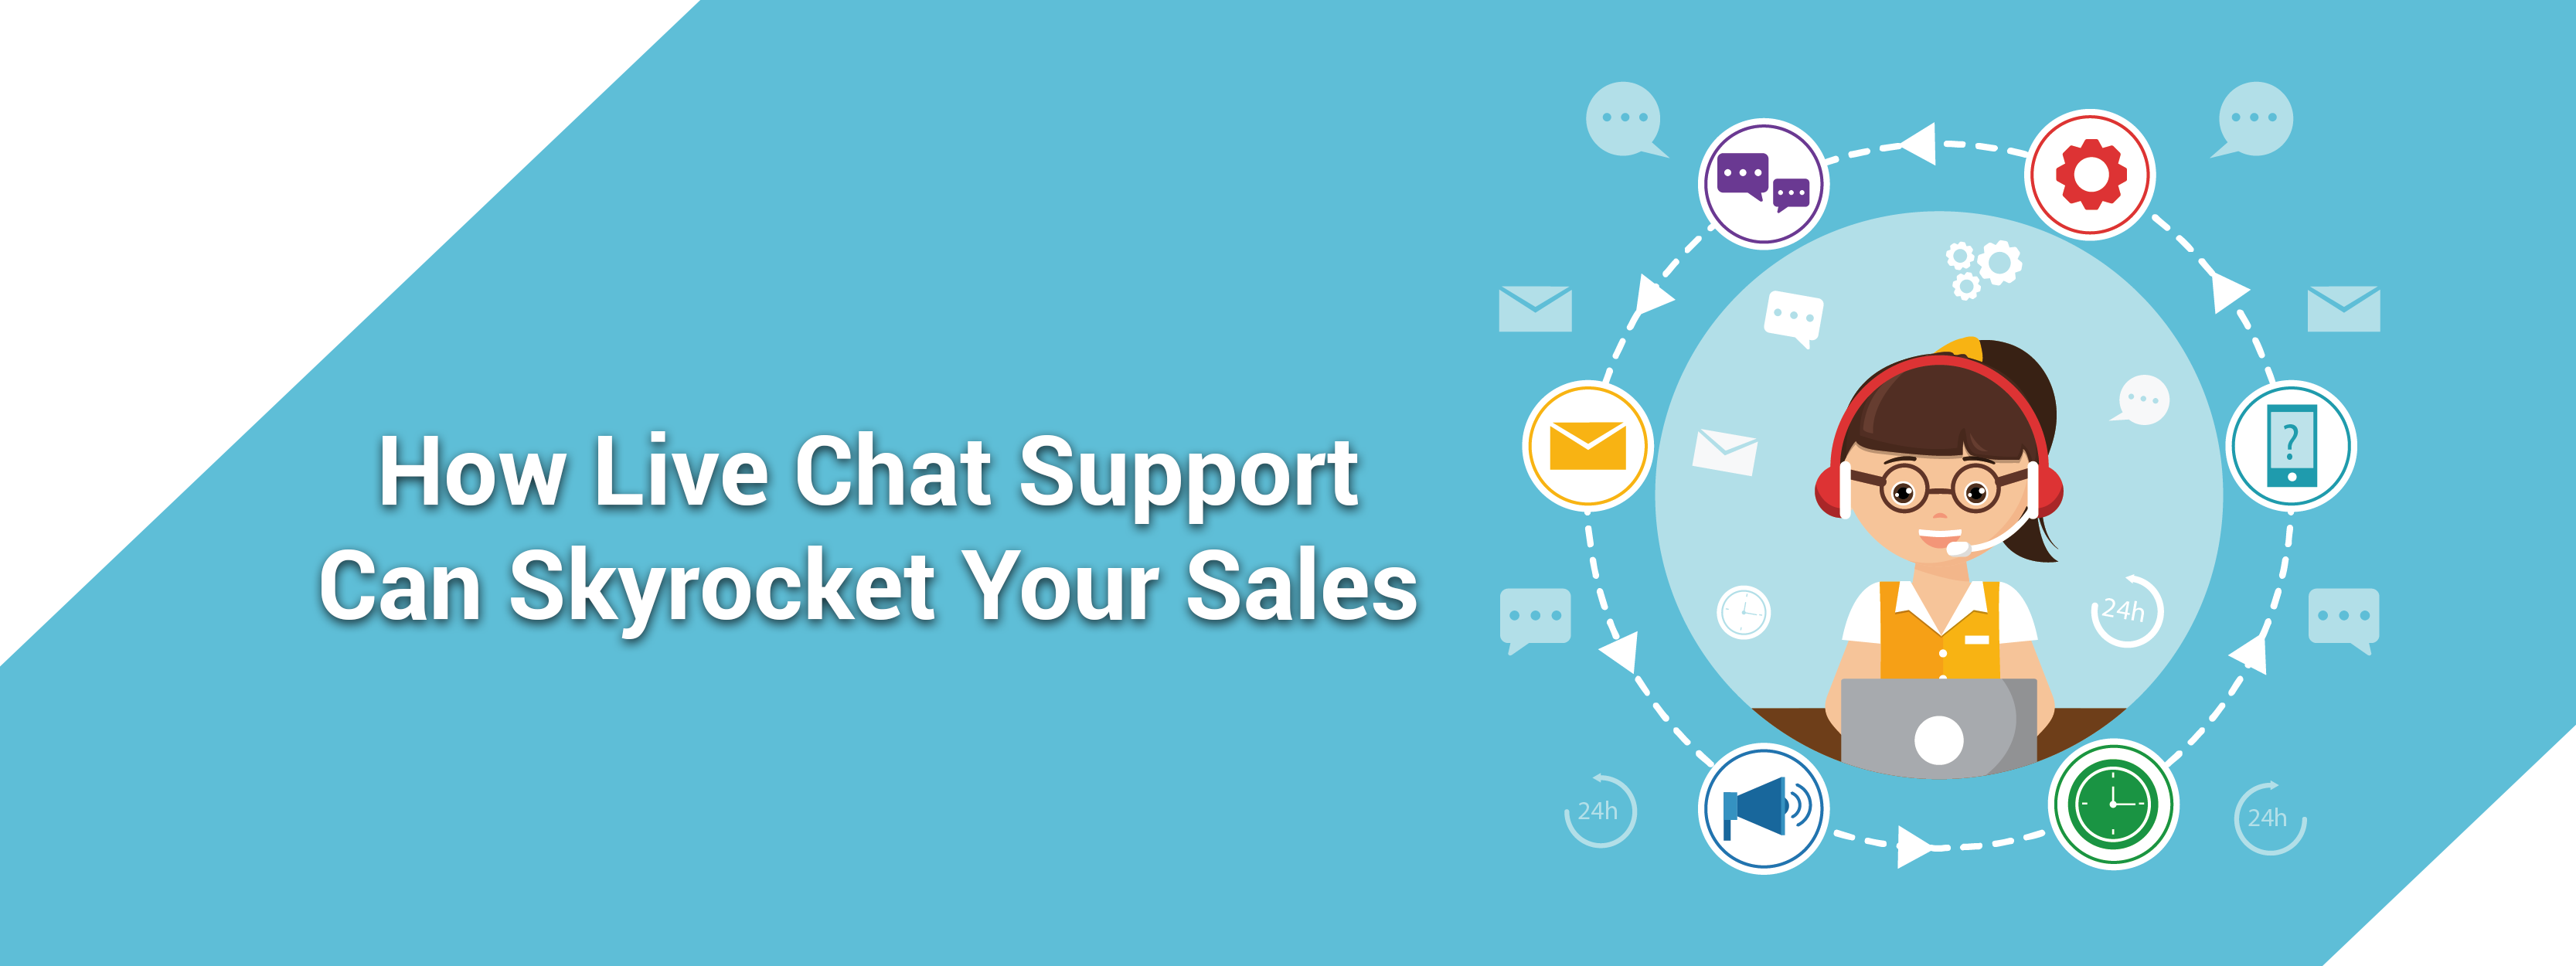 how live chat support can skyrocket your sales